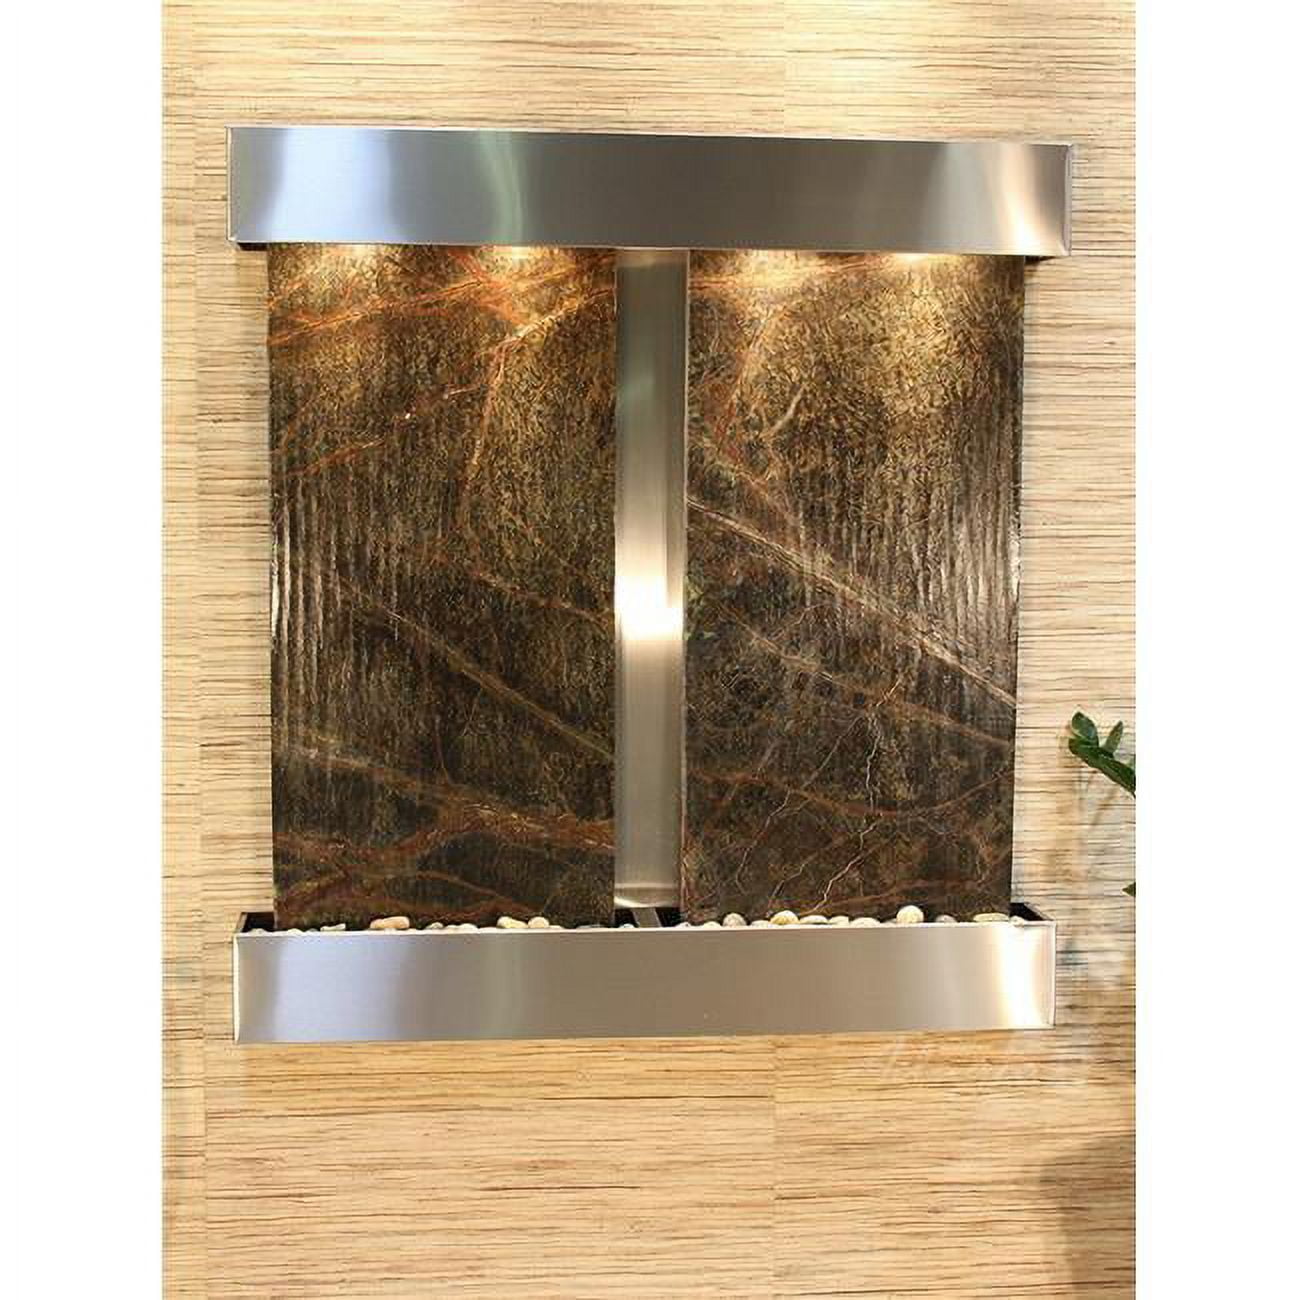 Picture of Adagio AFS2005 Aspen Falls Square Wall Fountain - Stainless Steel-Green Marble